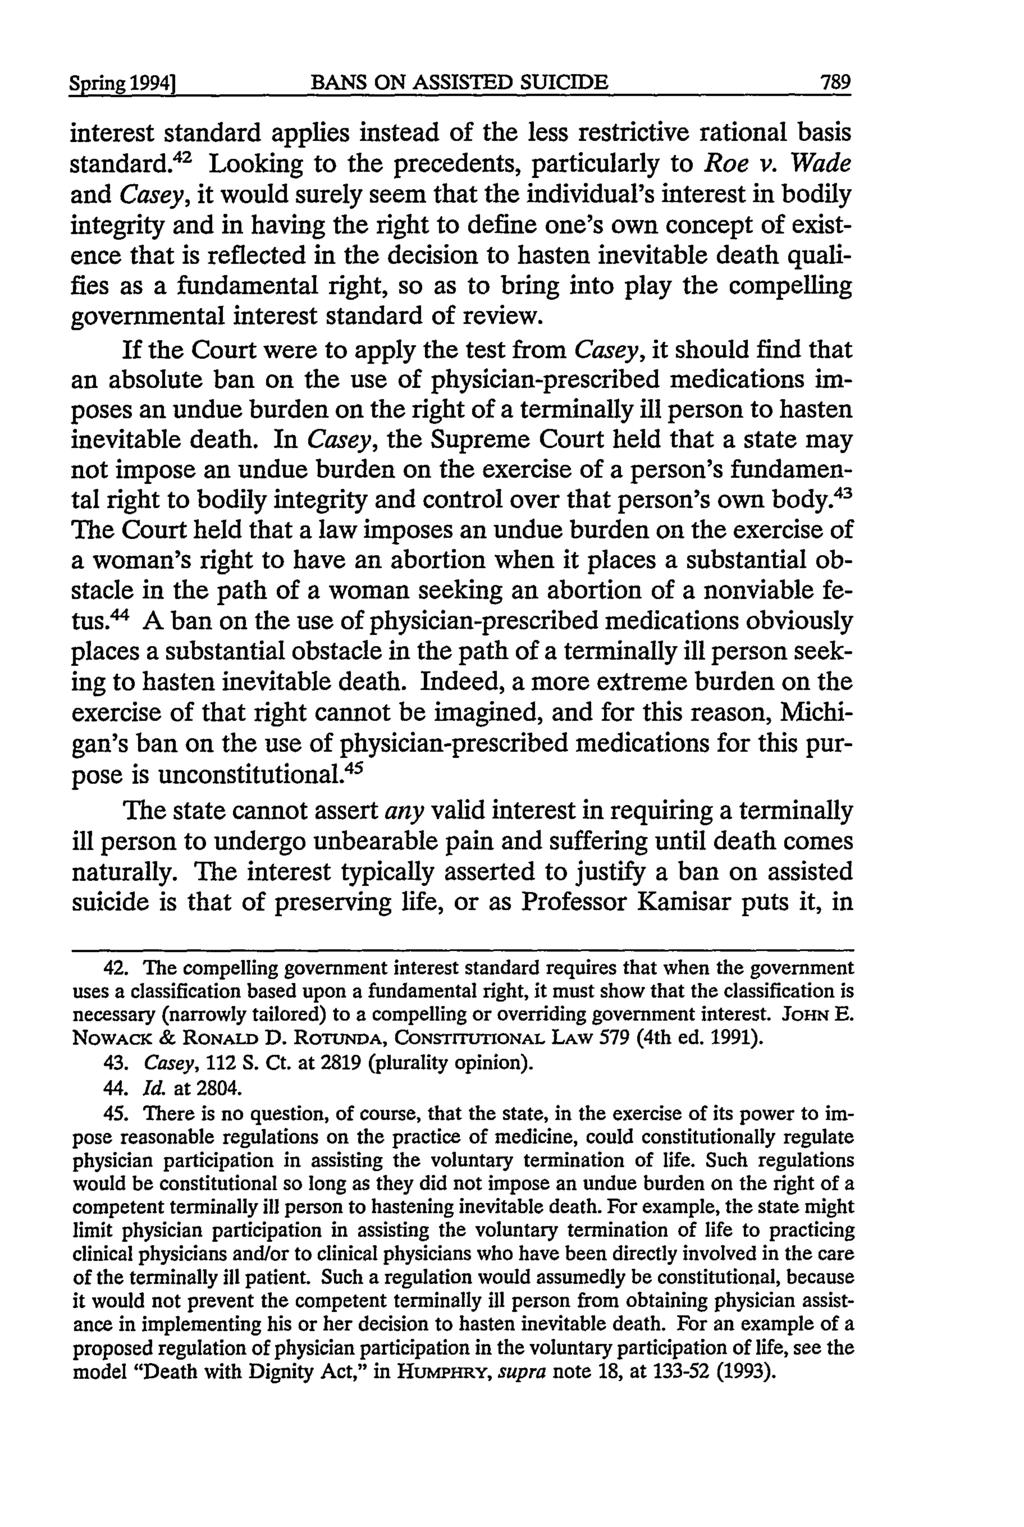 Sorin Sorine 19941 19941 BANS ON ASSISTED SUICIDE interest standard applies instead of the less restrictive rational basis standard. 4 ' Looking to the precedents, particularly to Roe v.